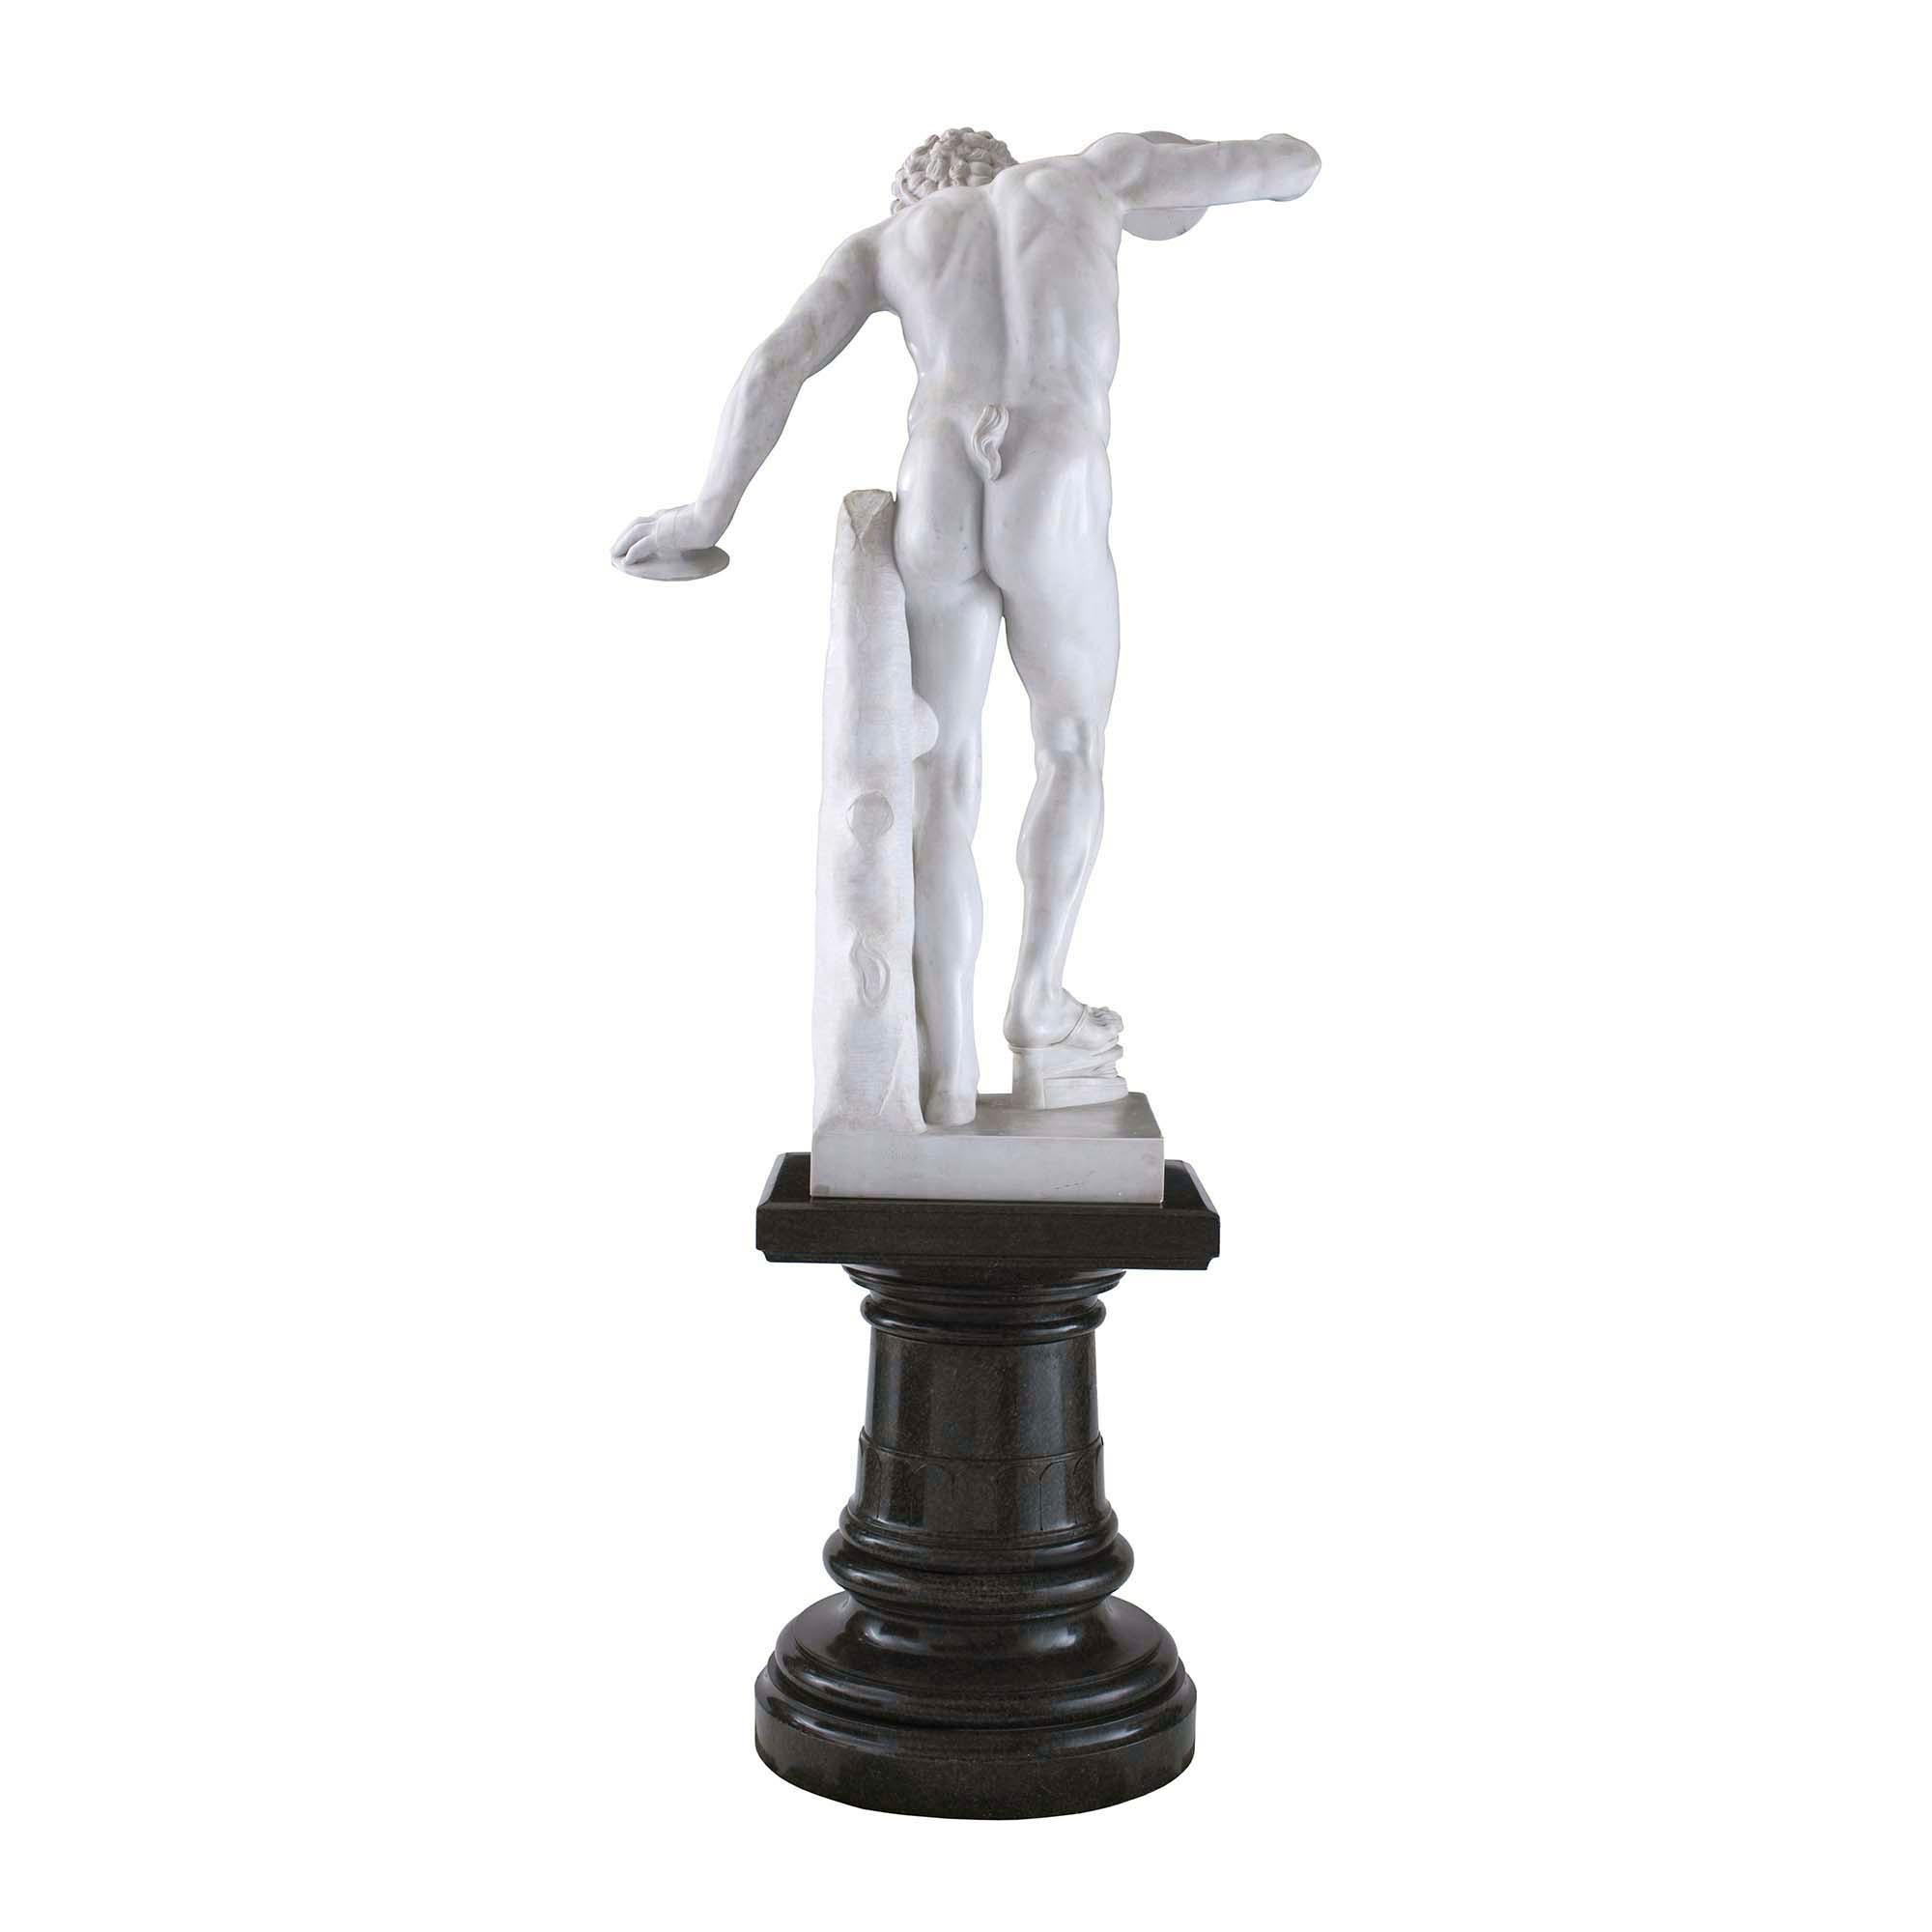 Italian 19th Century Neoclassical Style Marble Statue of a Faun with Cymbals In Good Condition For Sale In West Palm Beach, FL